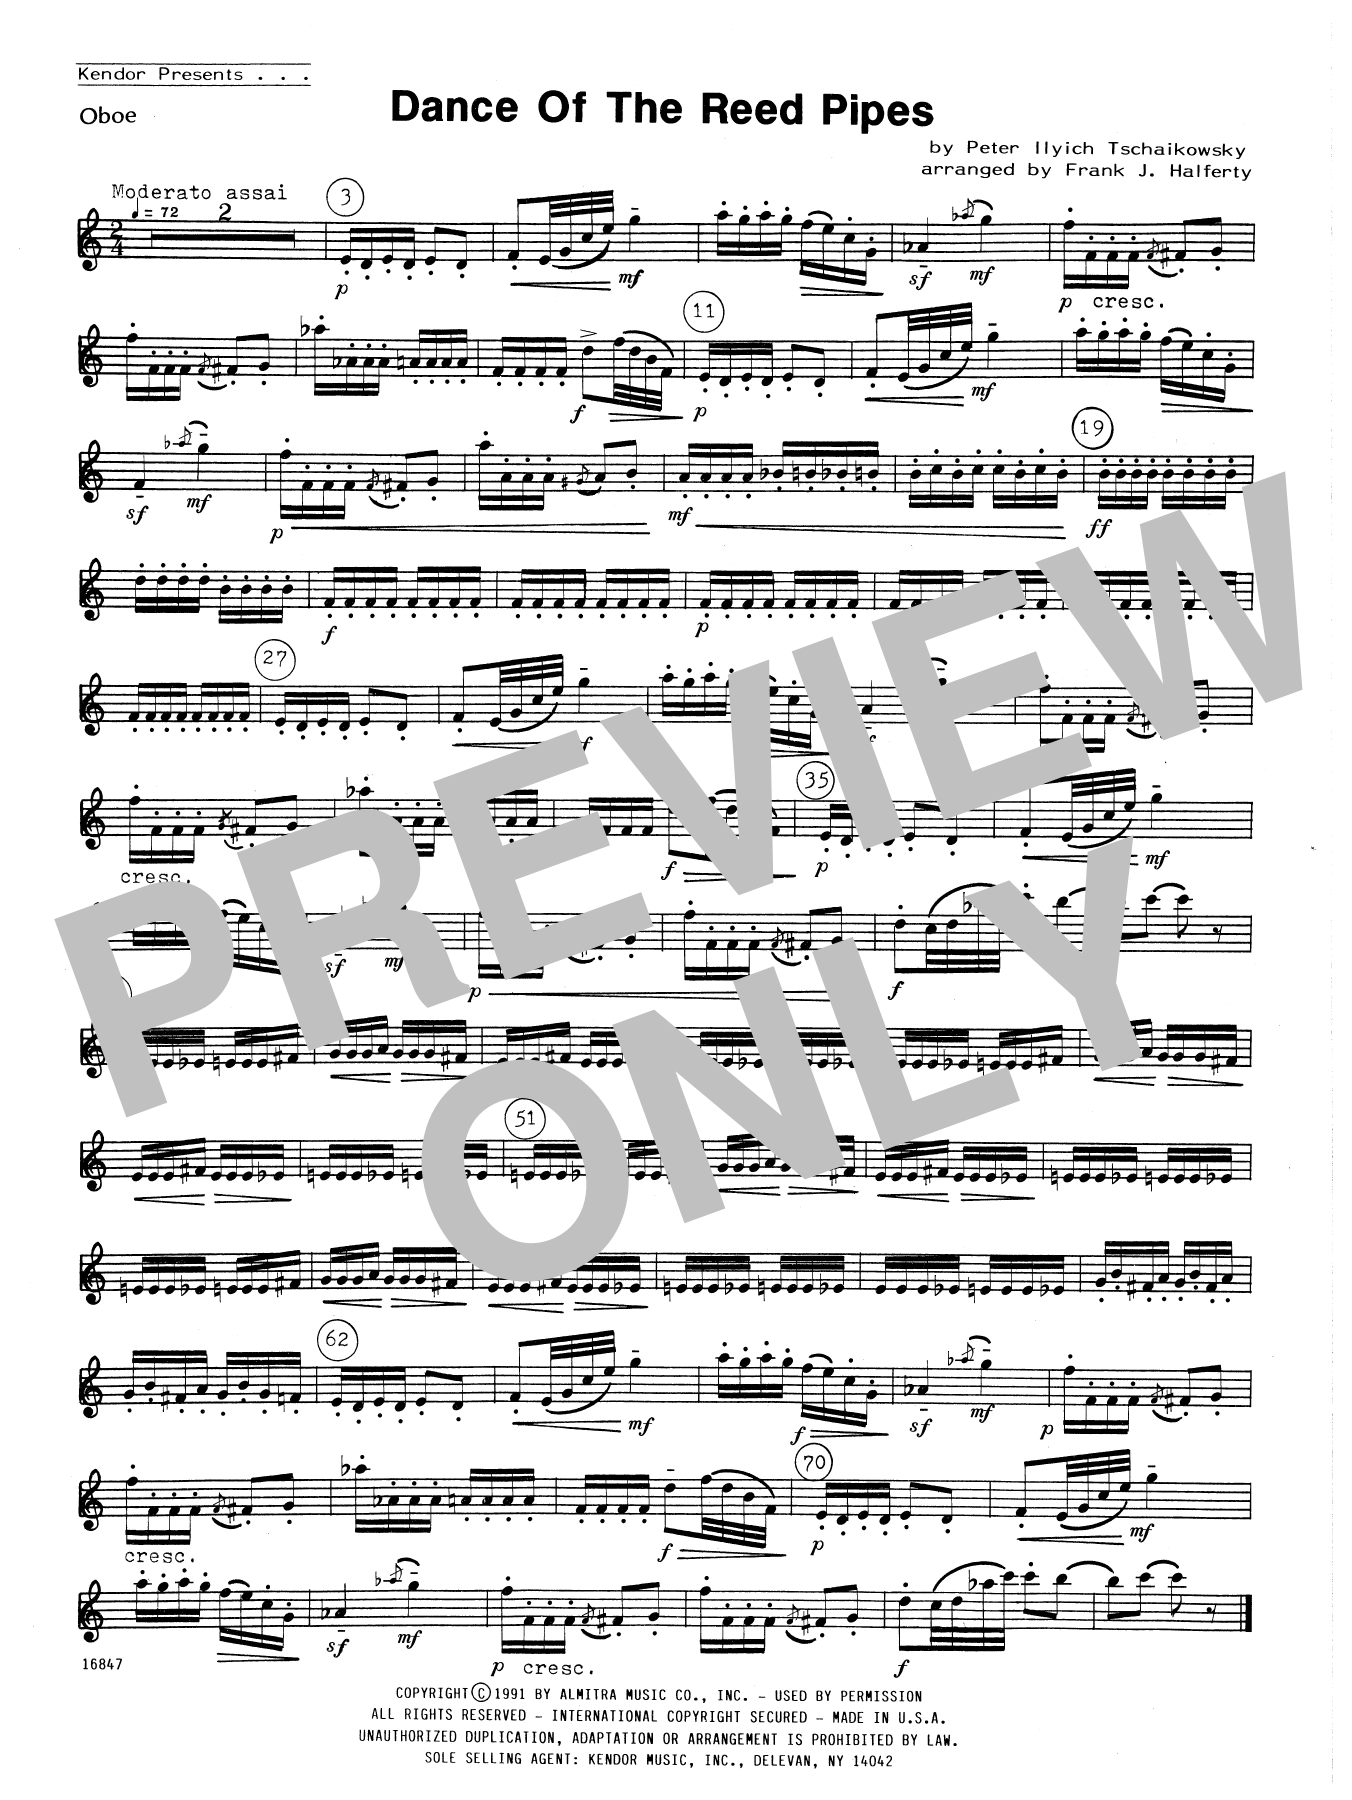 Frank J. Halferty Dance Of The Reed Pipes - Oboe sheet music notes and chords. Download Printable PDF.